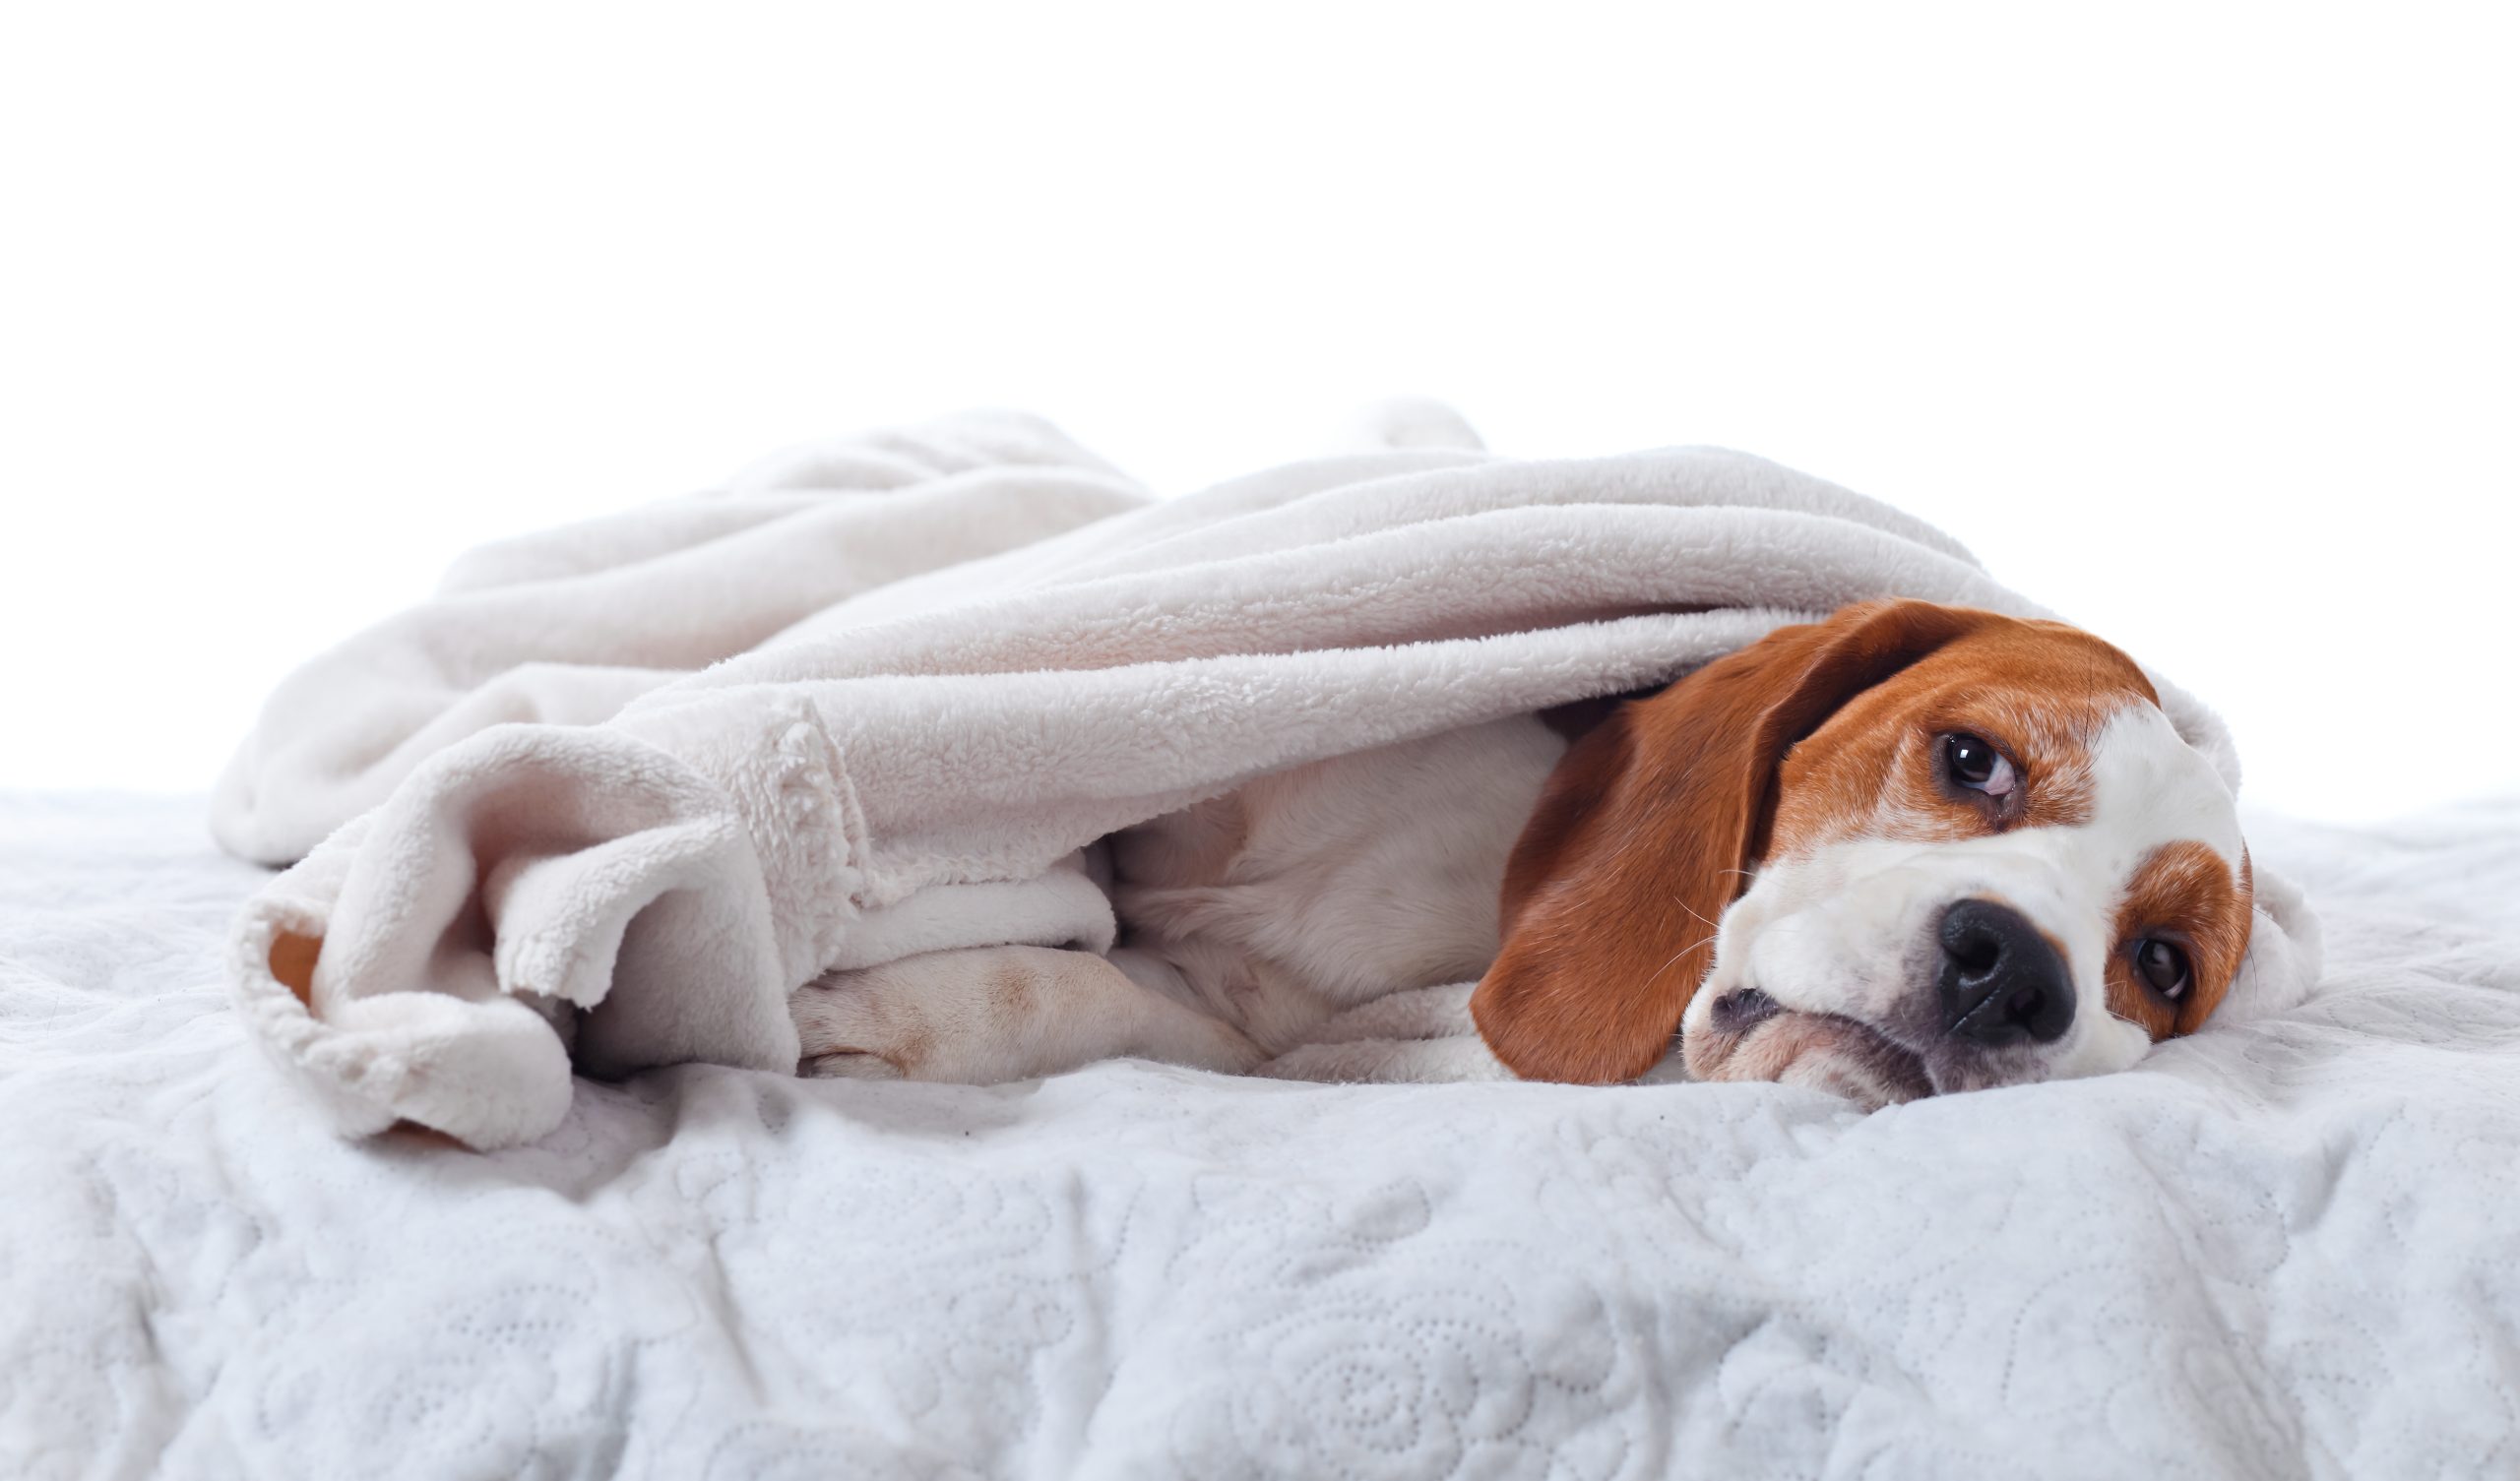 Sick Beagle lying under a white blanket on a bed.